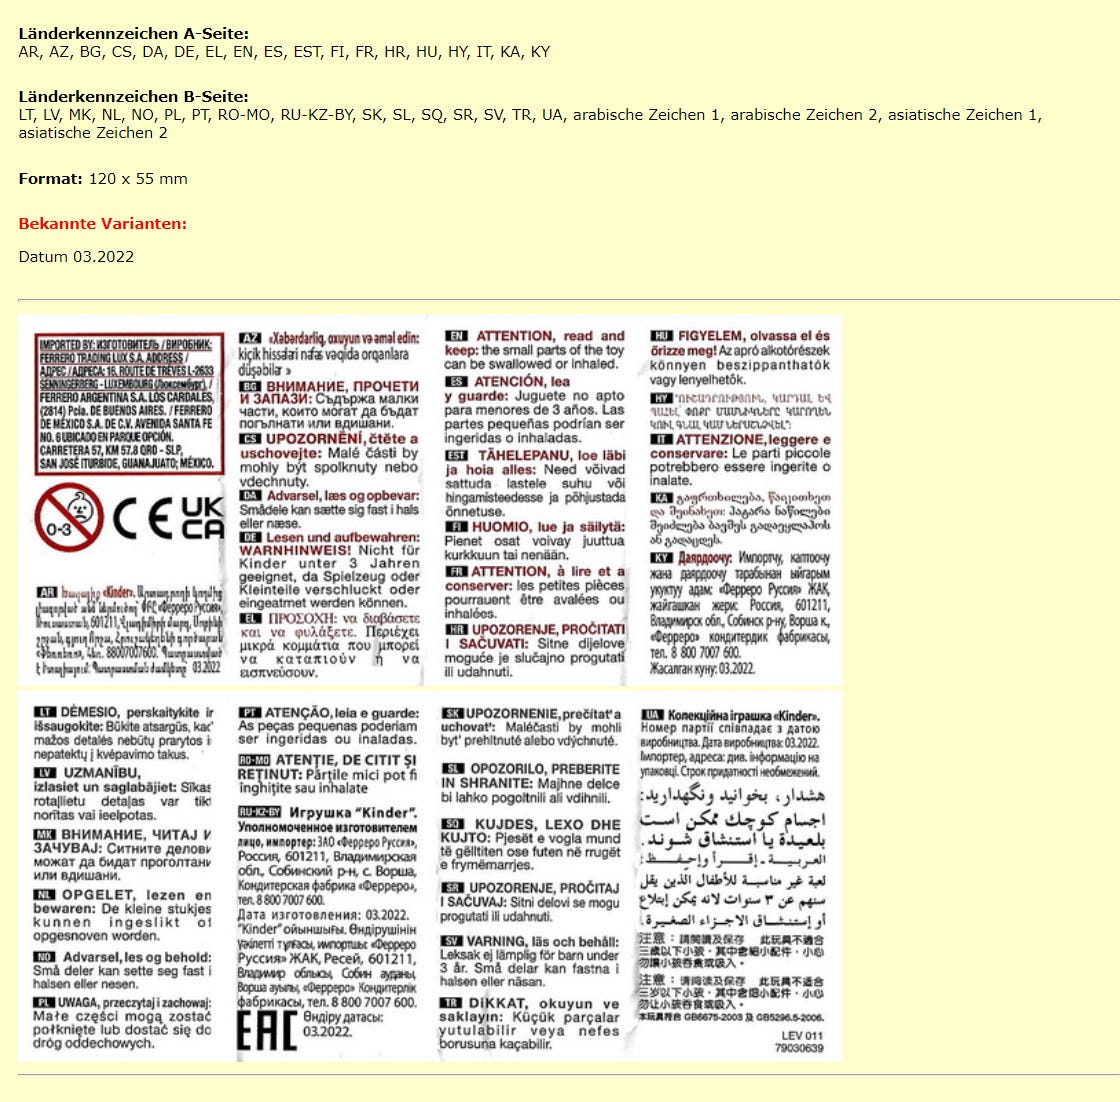 Screen shot of the Codex's page on one particular warning message sheet